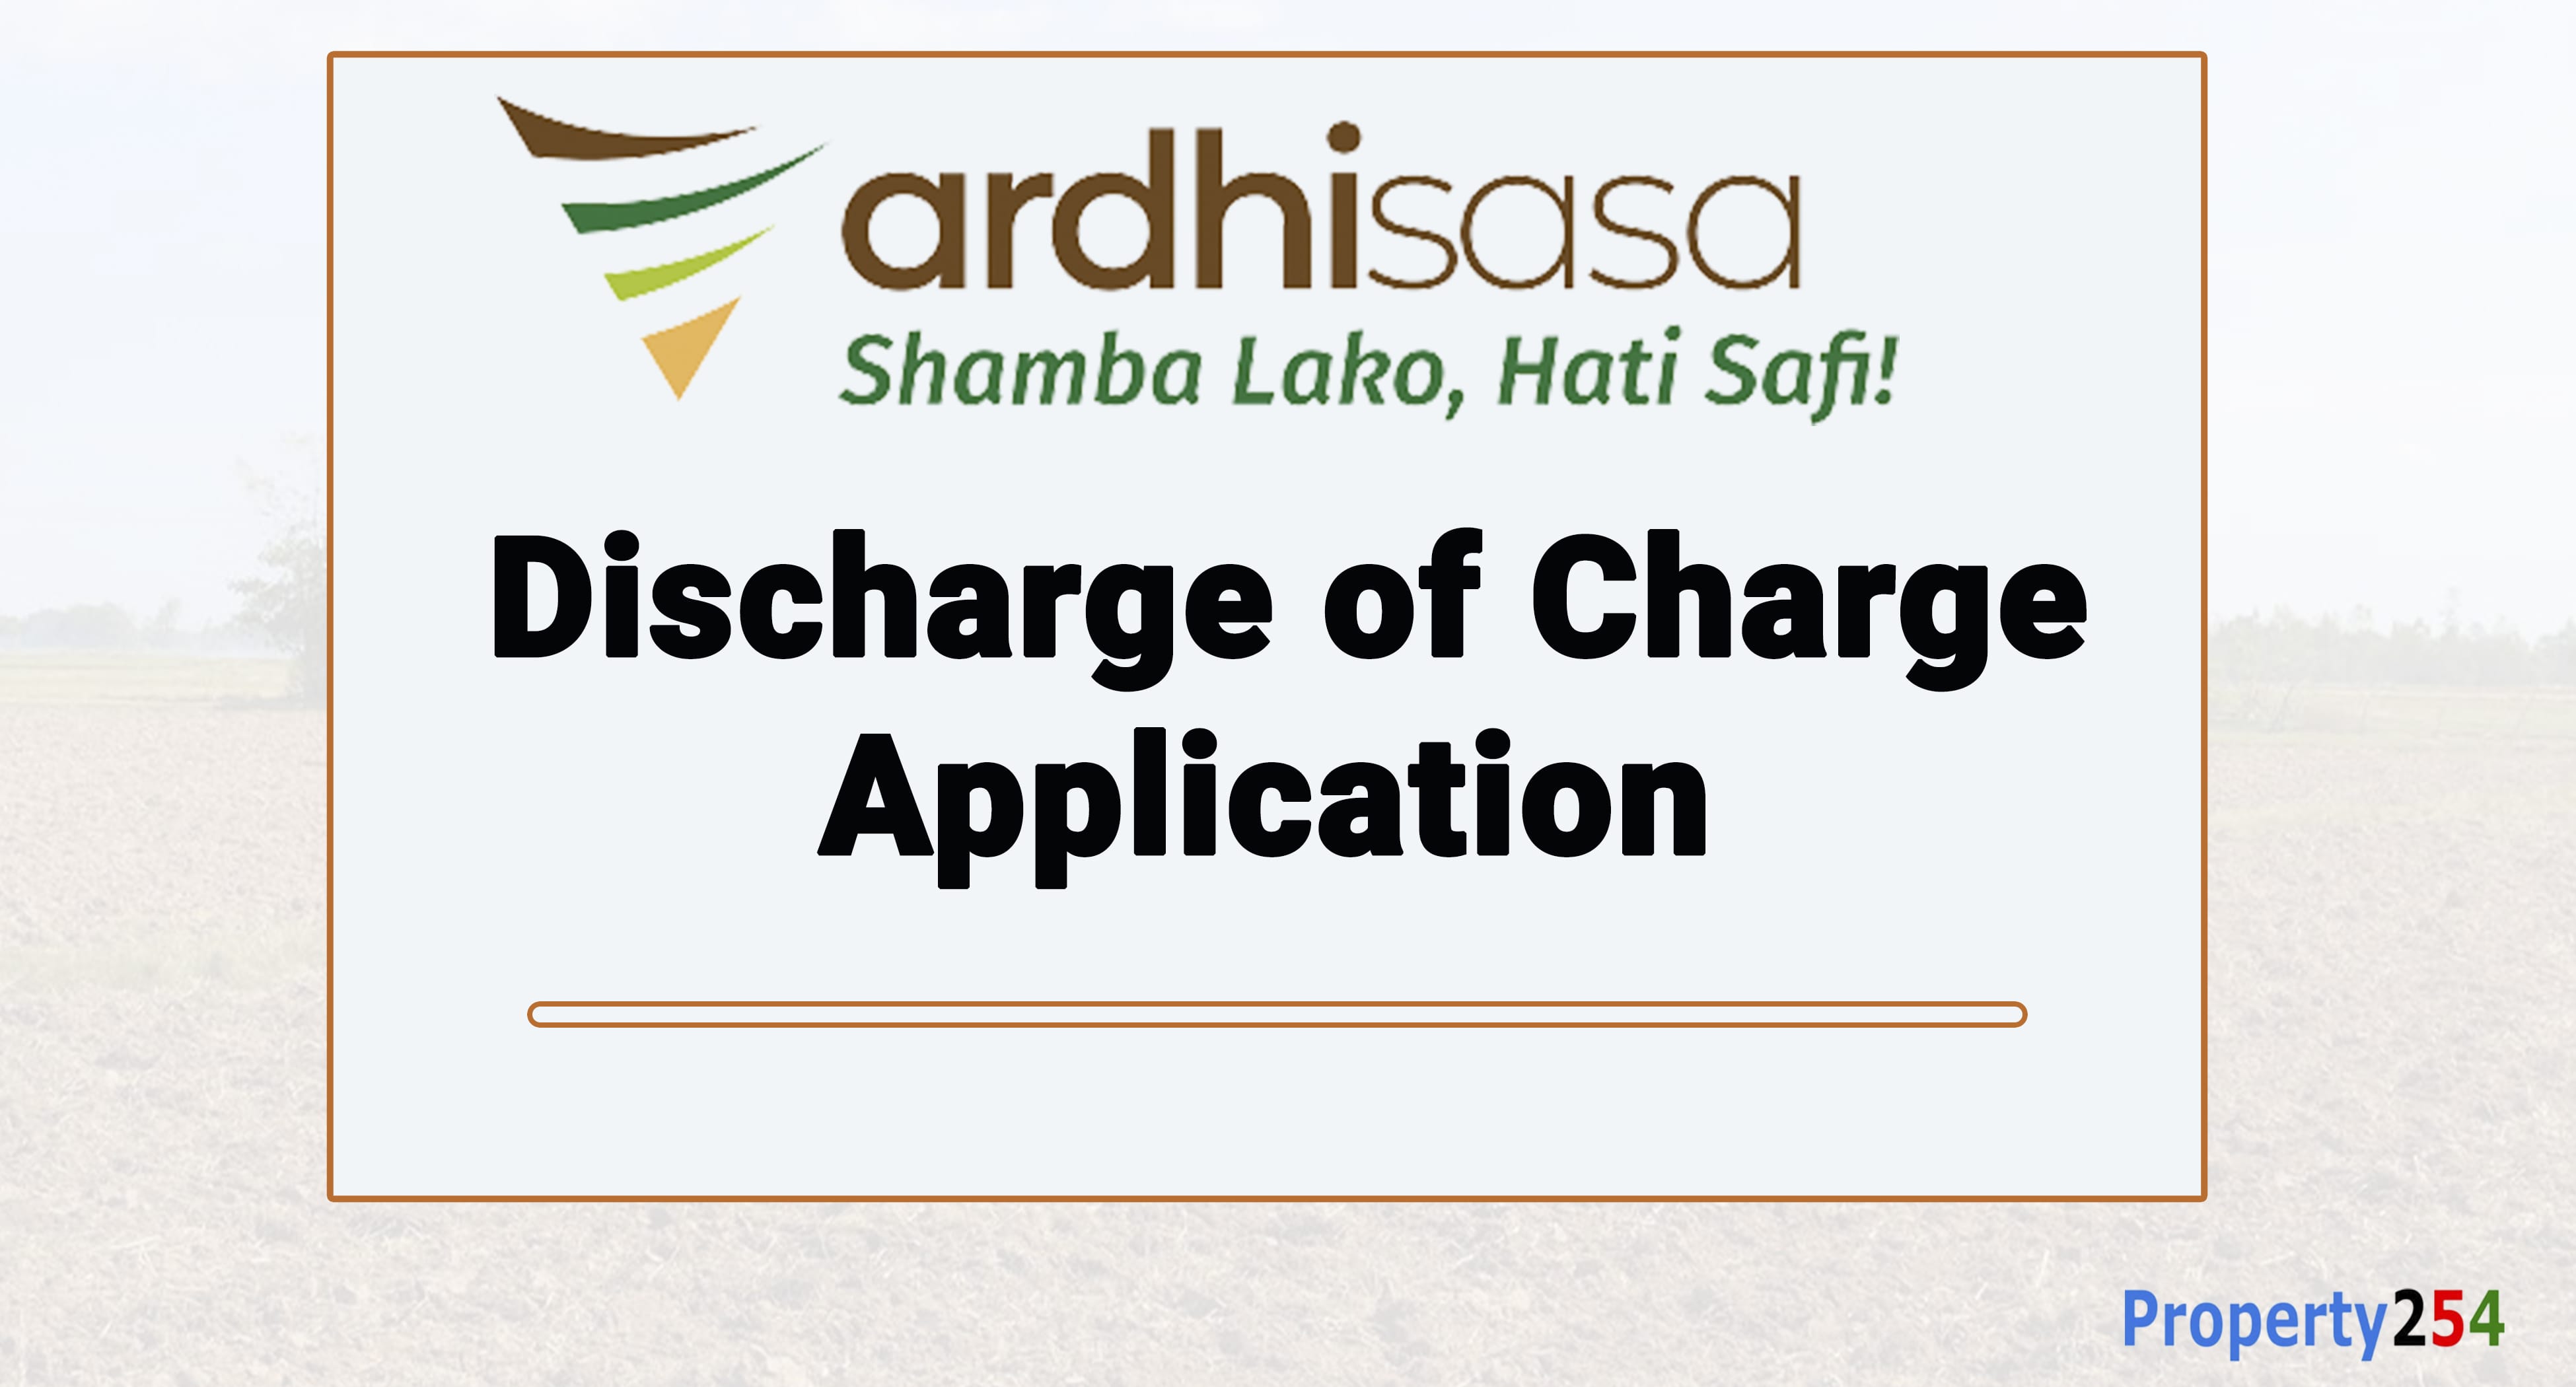 How to Make a Discharge of Charge Application on Ardhisasa thumbnail